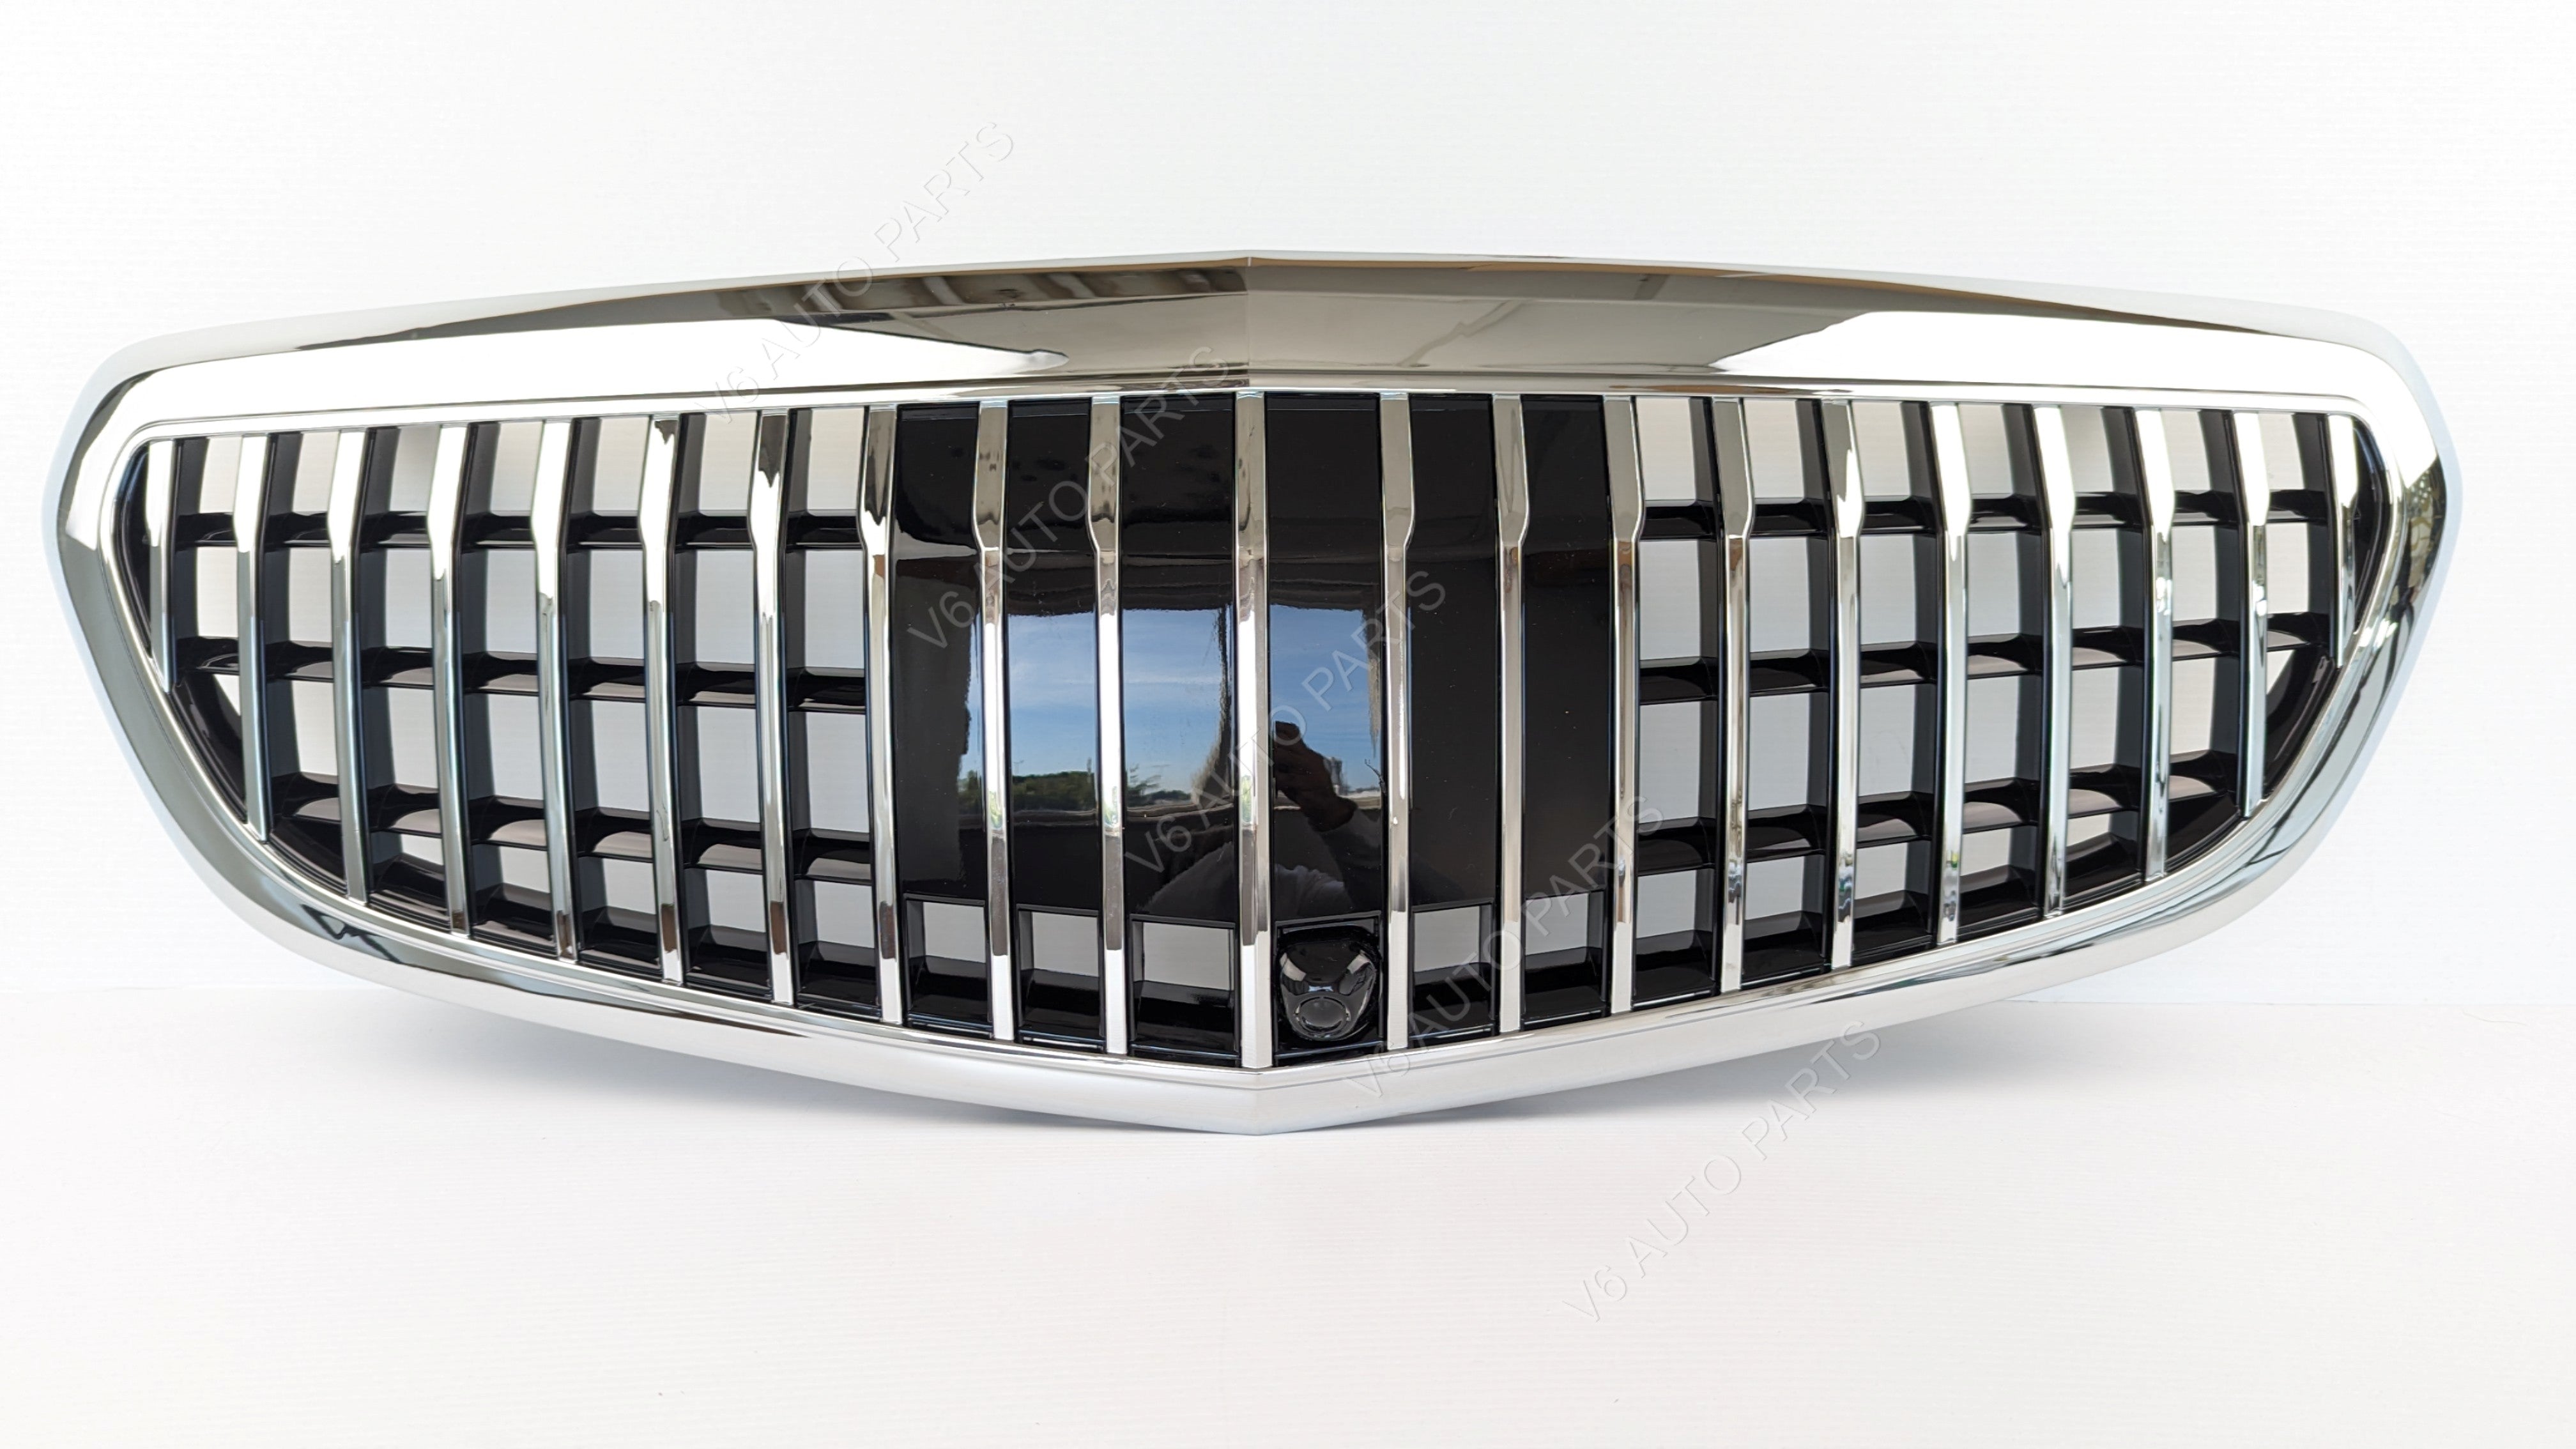 For Mercedes E-Class W212 E400 Grill Maybach Facelift Front Bumper Grille 13-16